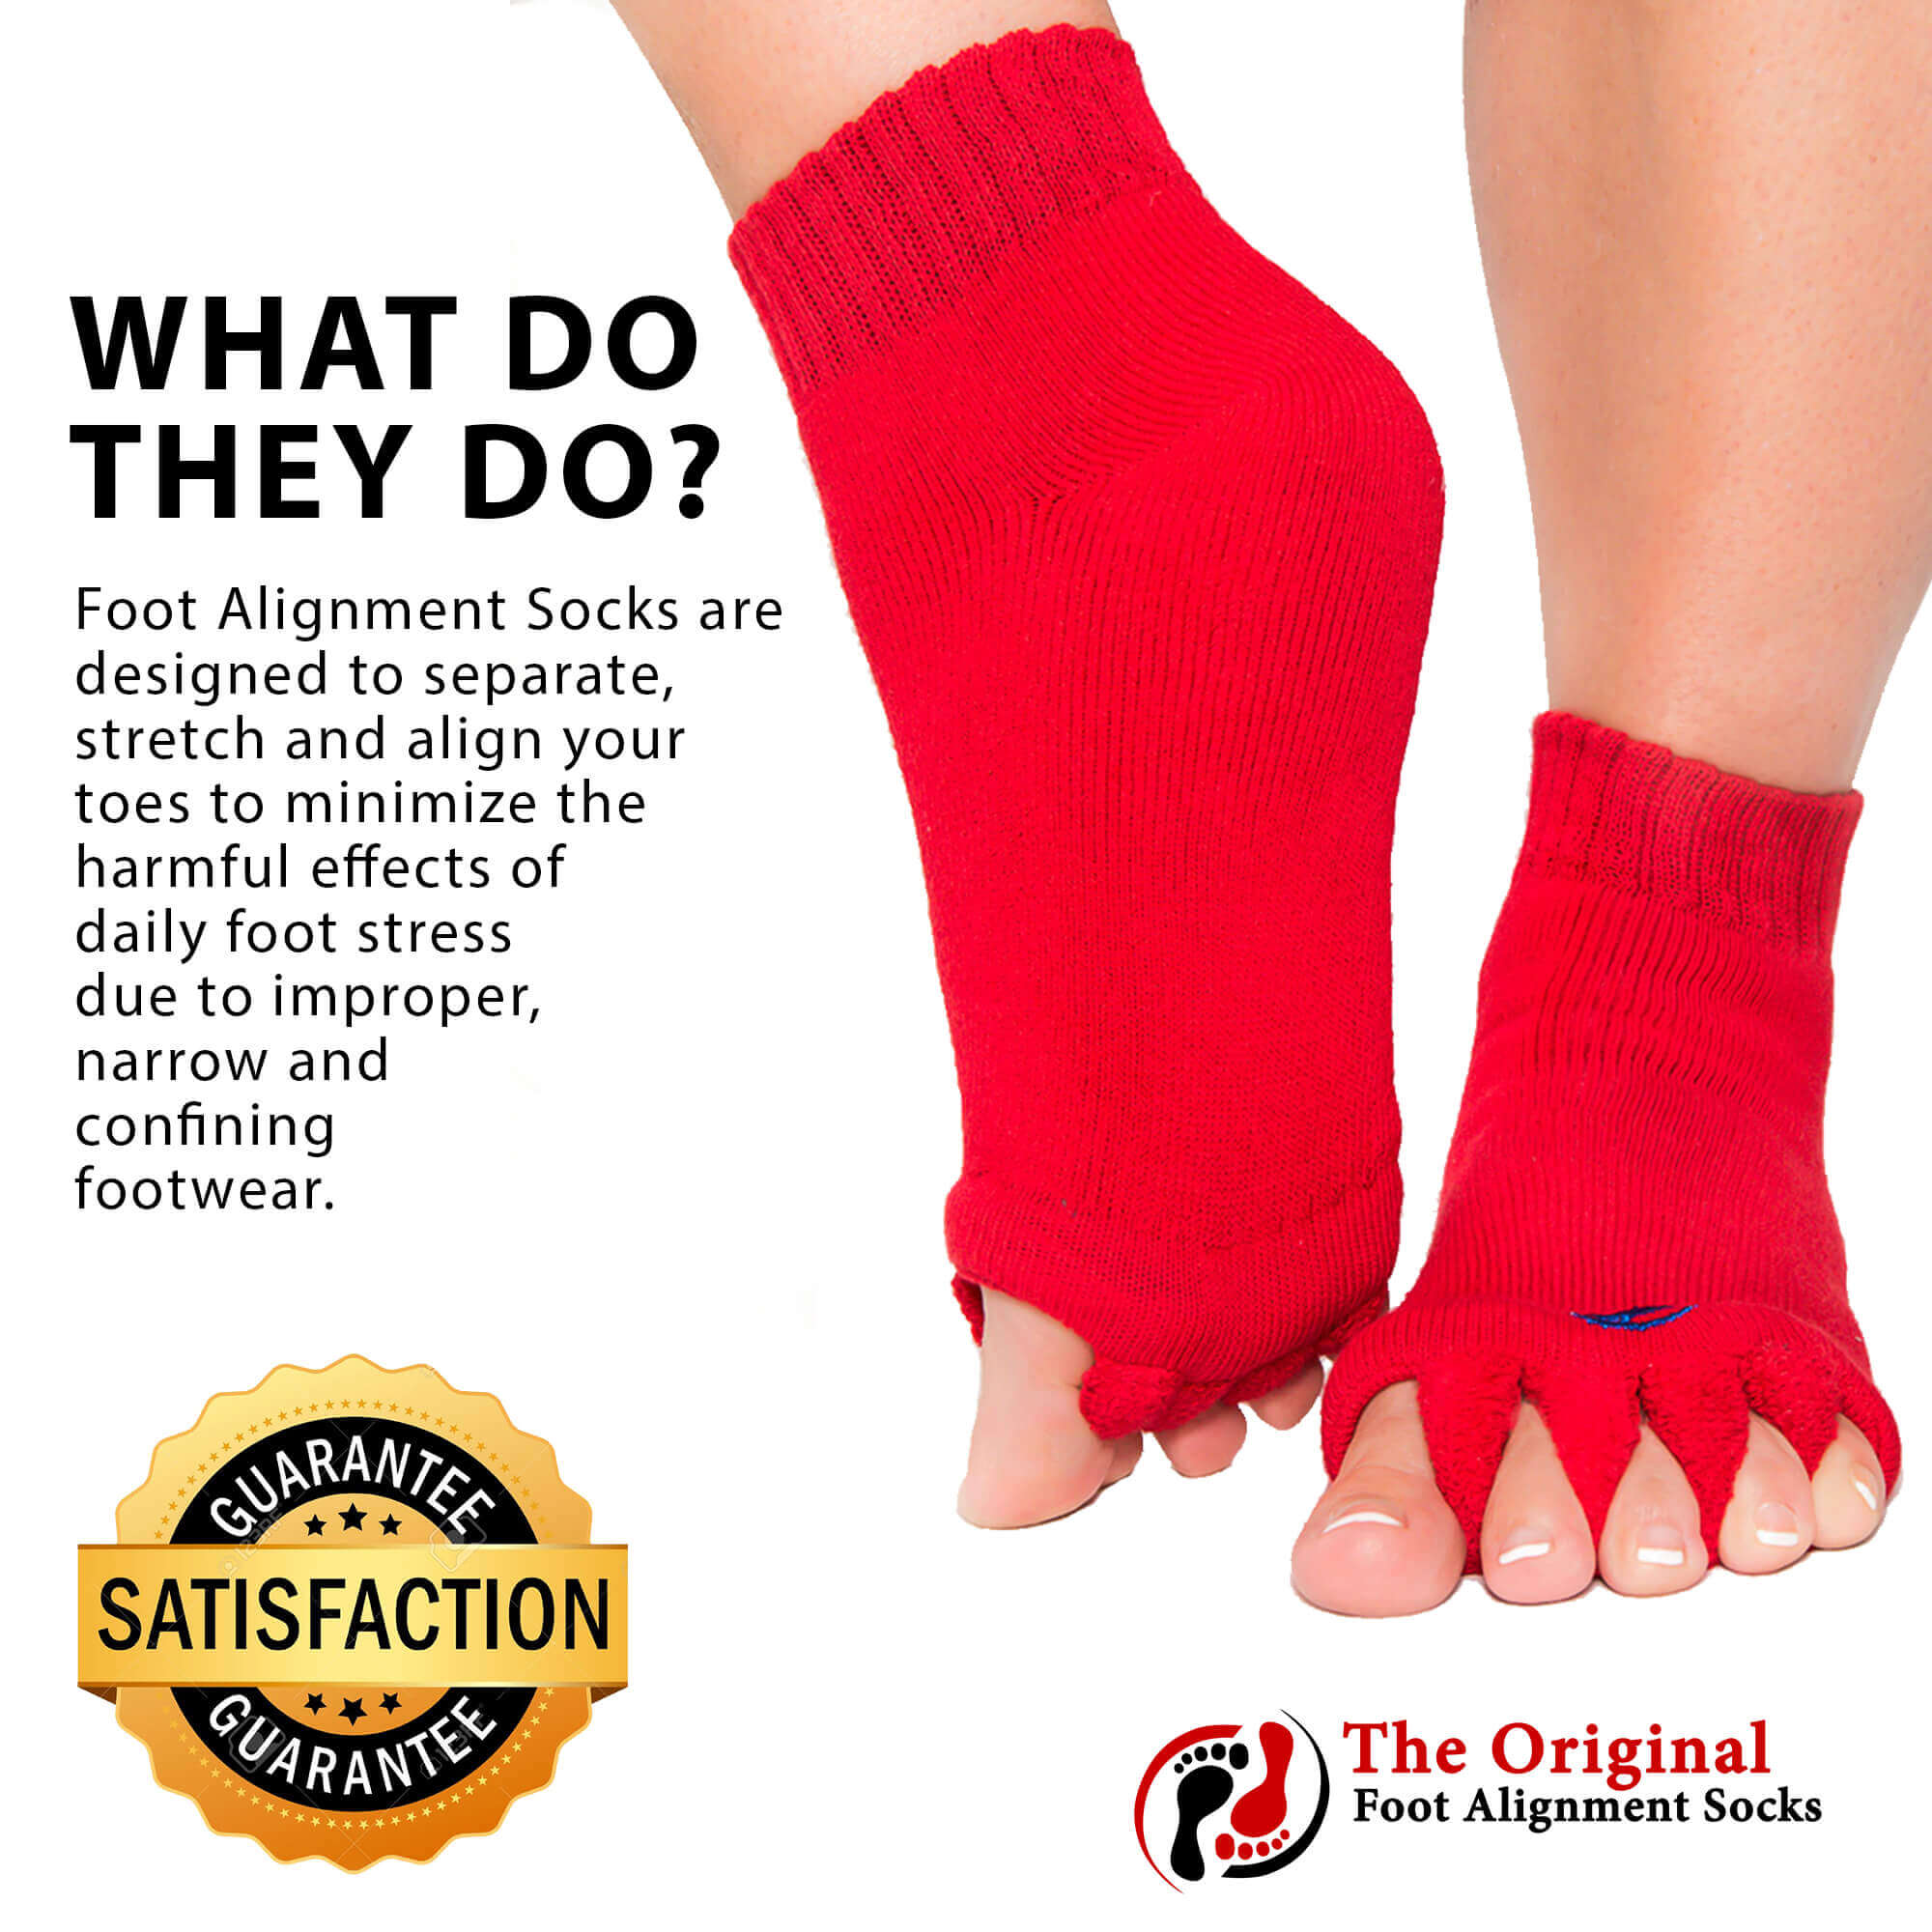 Alignment socks for foot pain, plantar fasciitis and bunions in